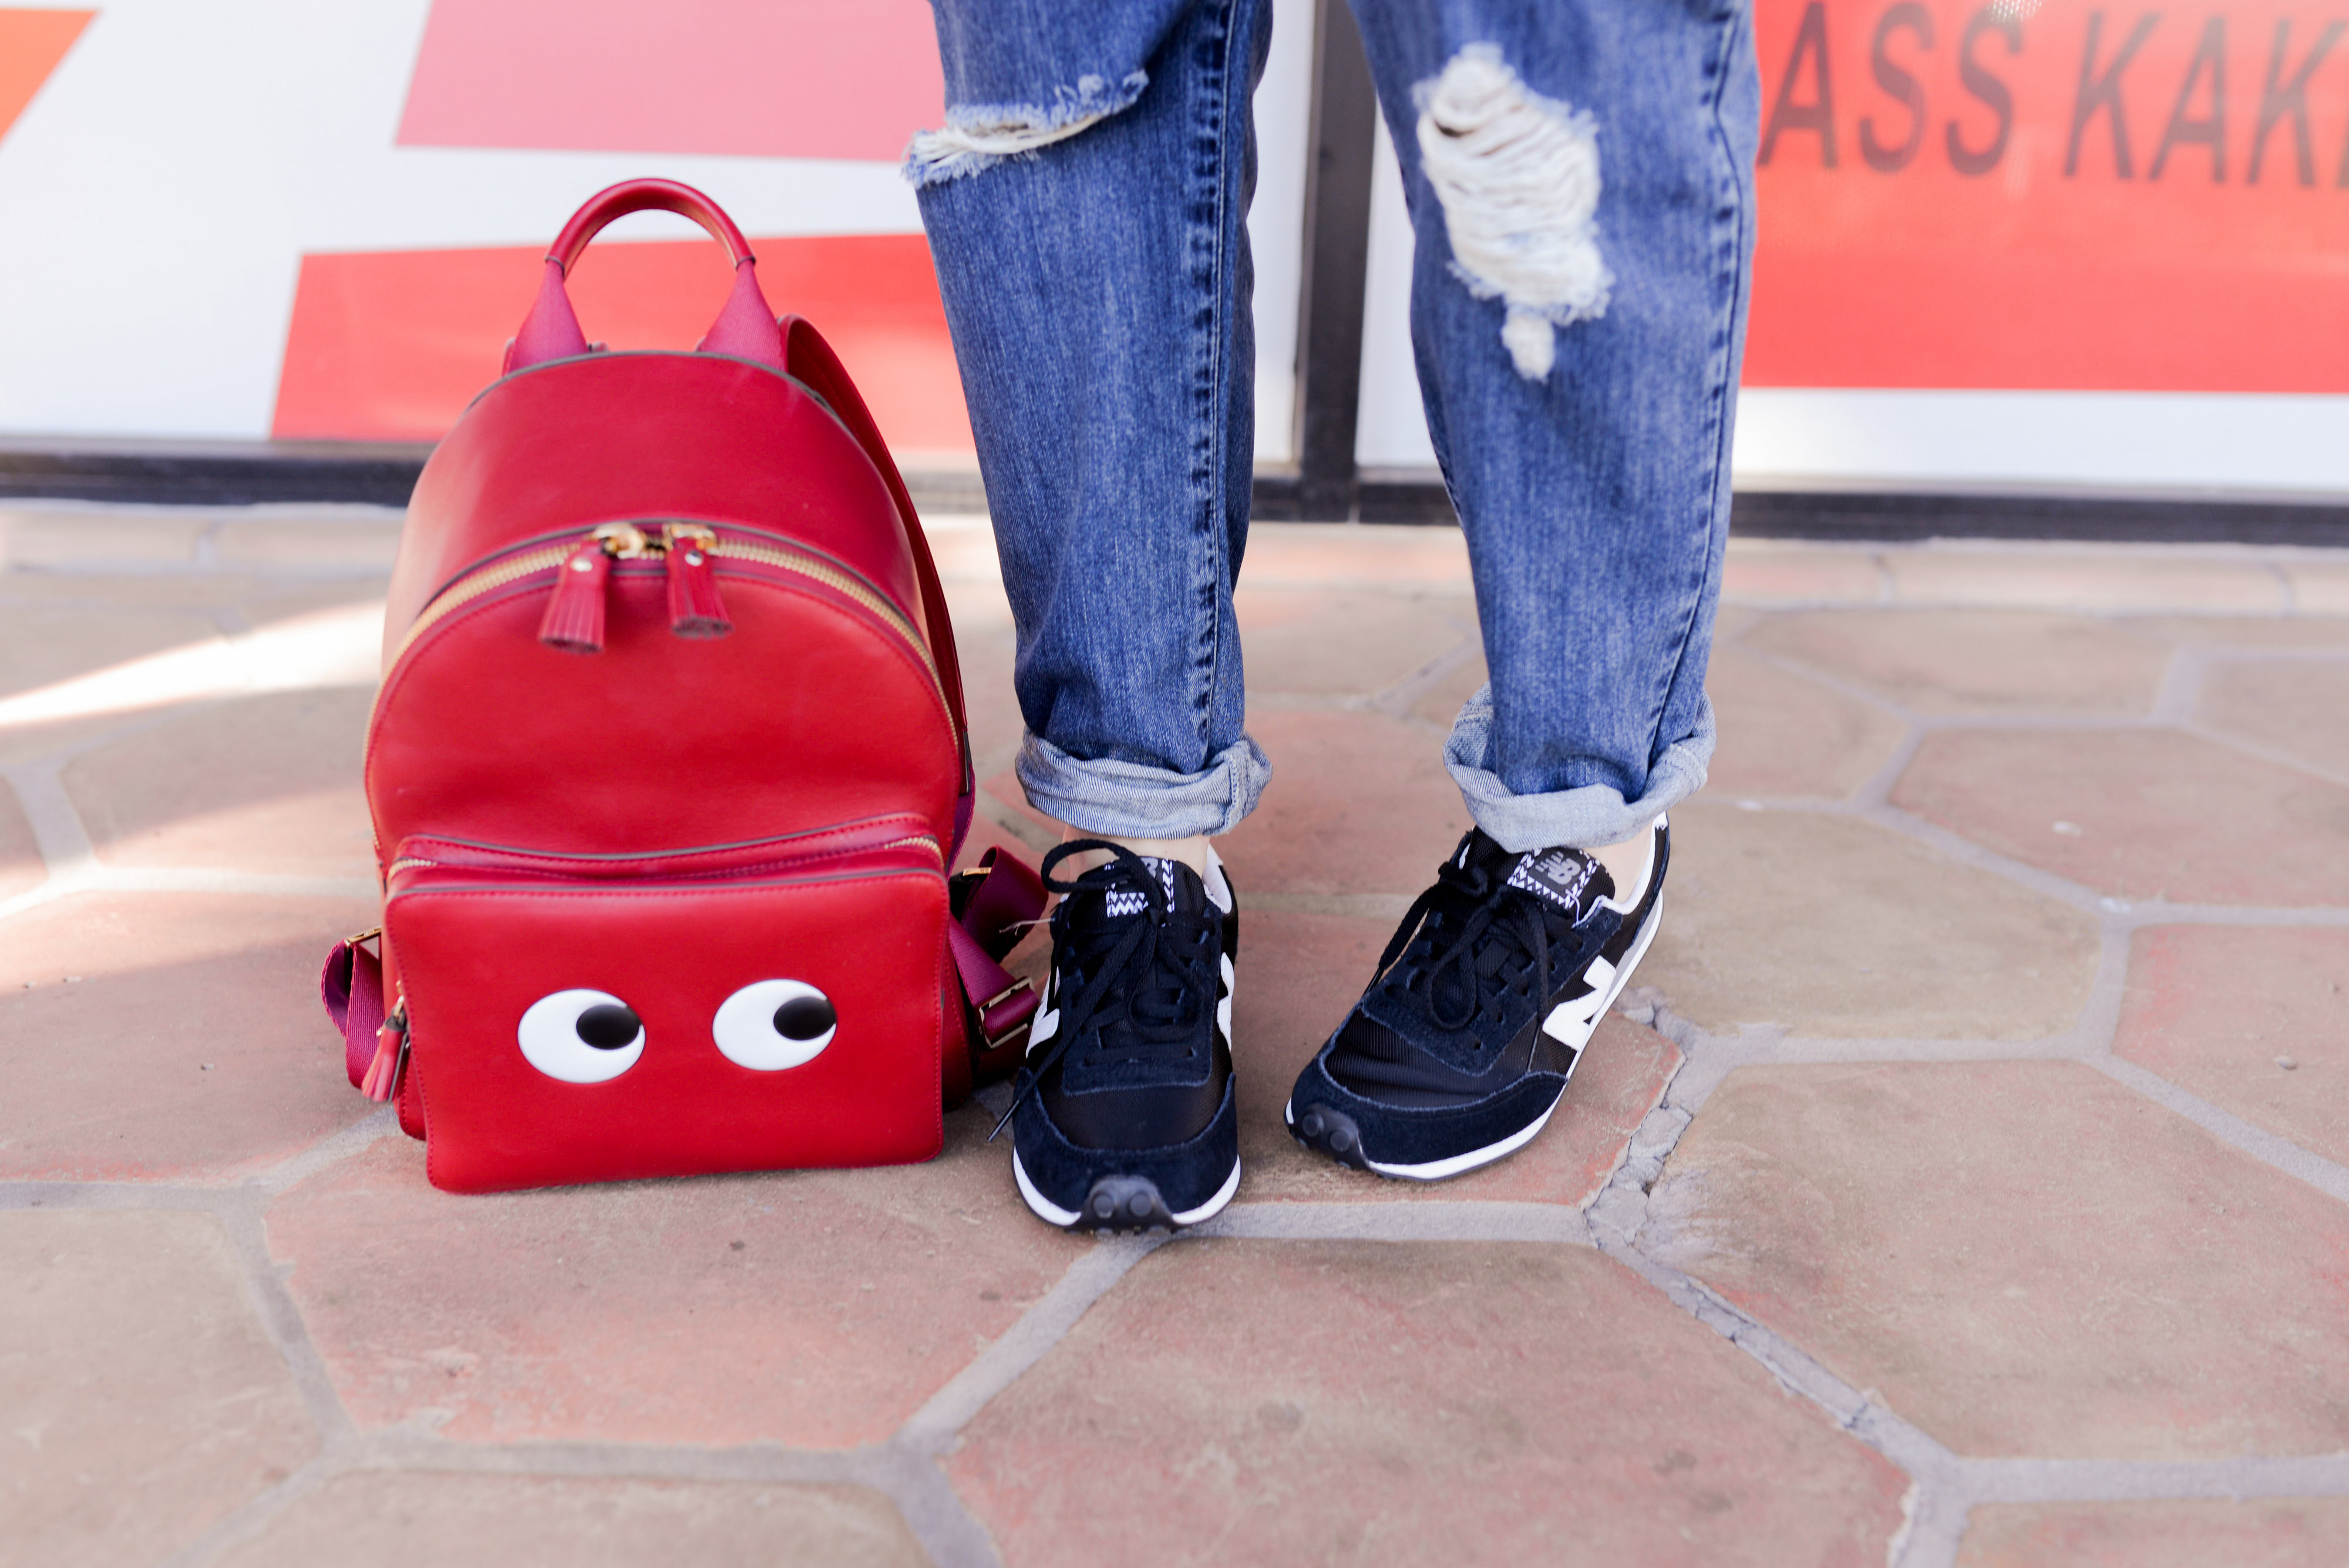 Anya Hindmarch red backpack